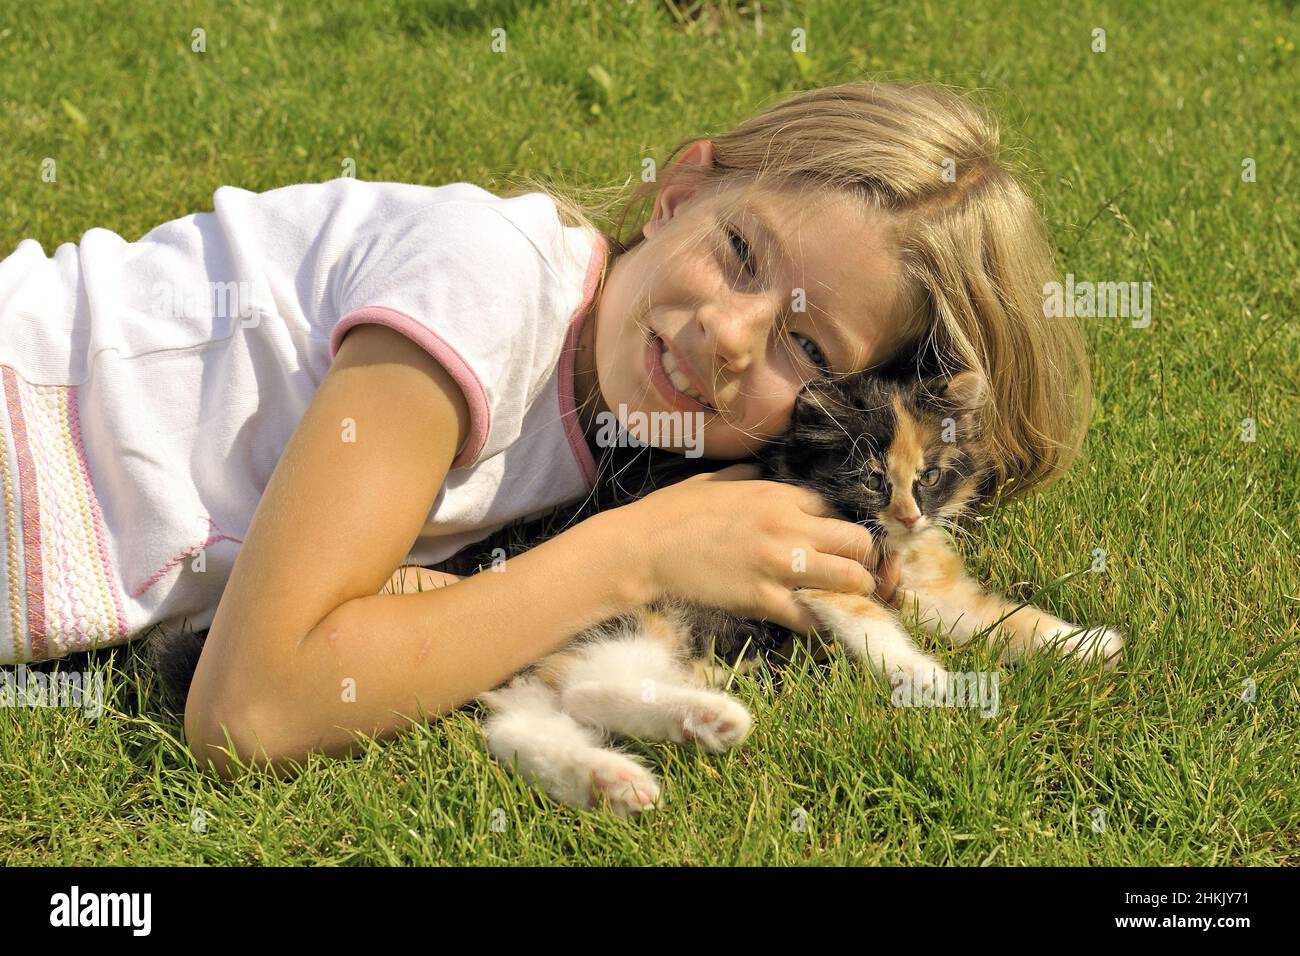 domestic cat, house cat (Felis silvestris f. catus), little blond girl lying happily with a kitten in a meadow Stock Photo